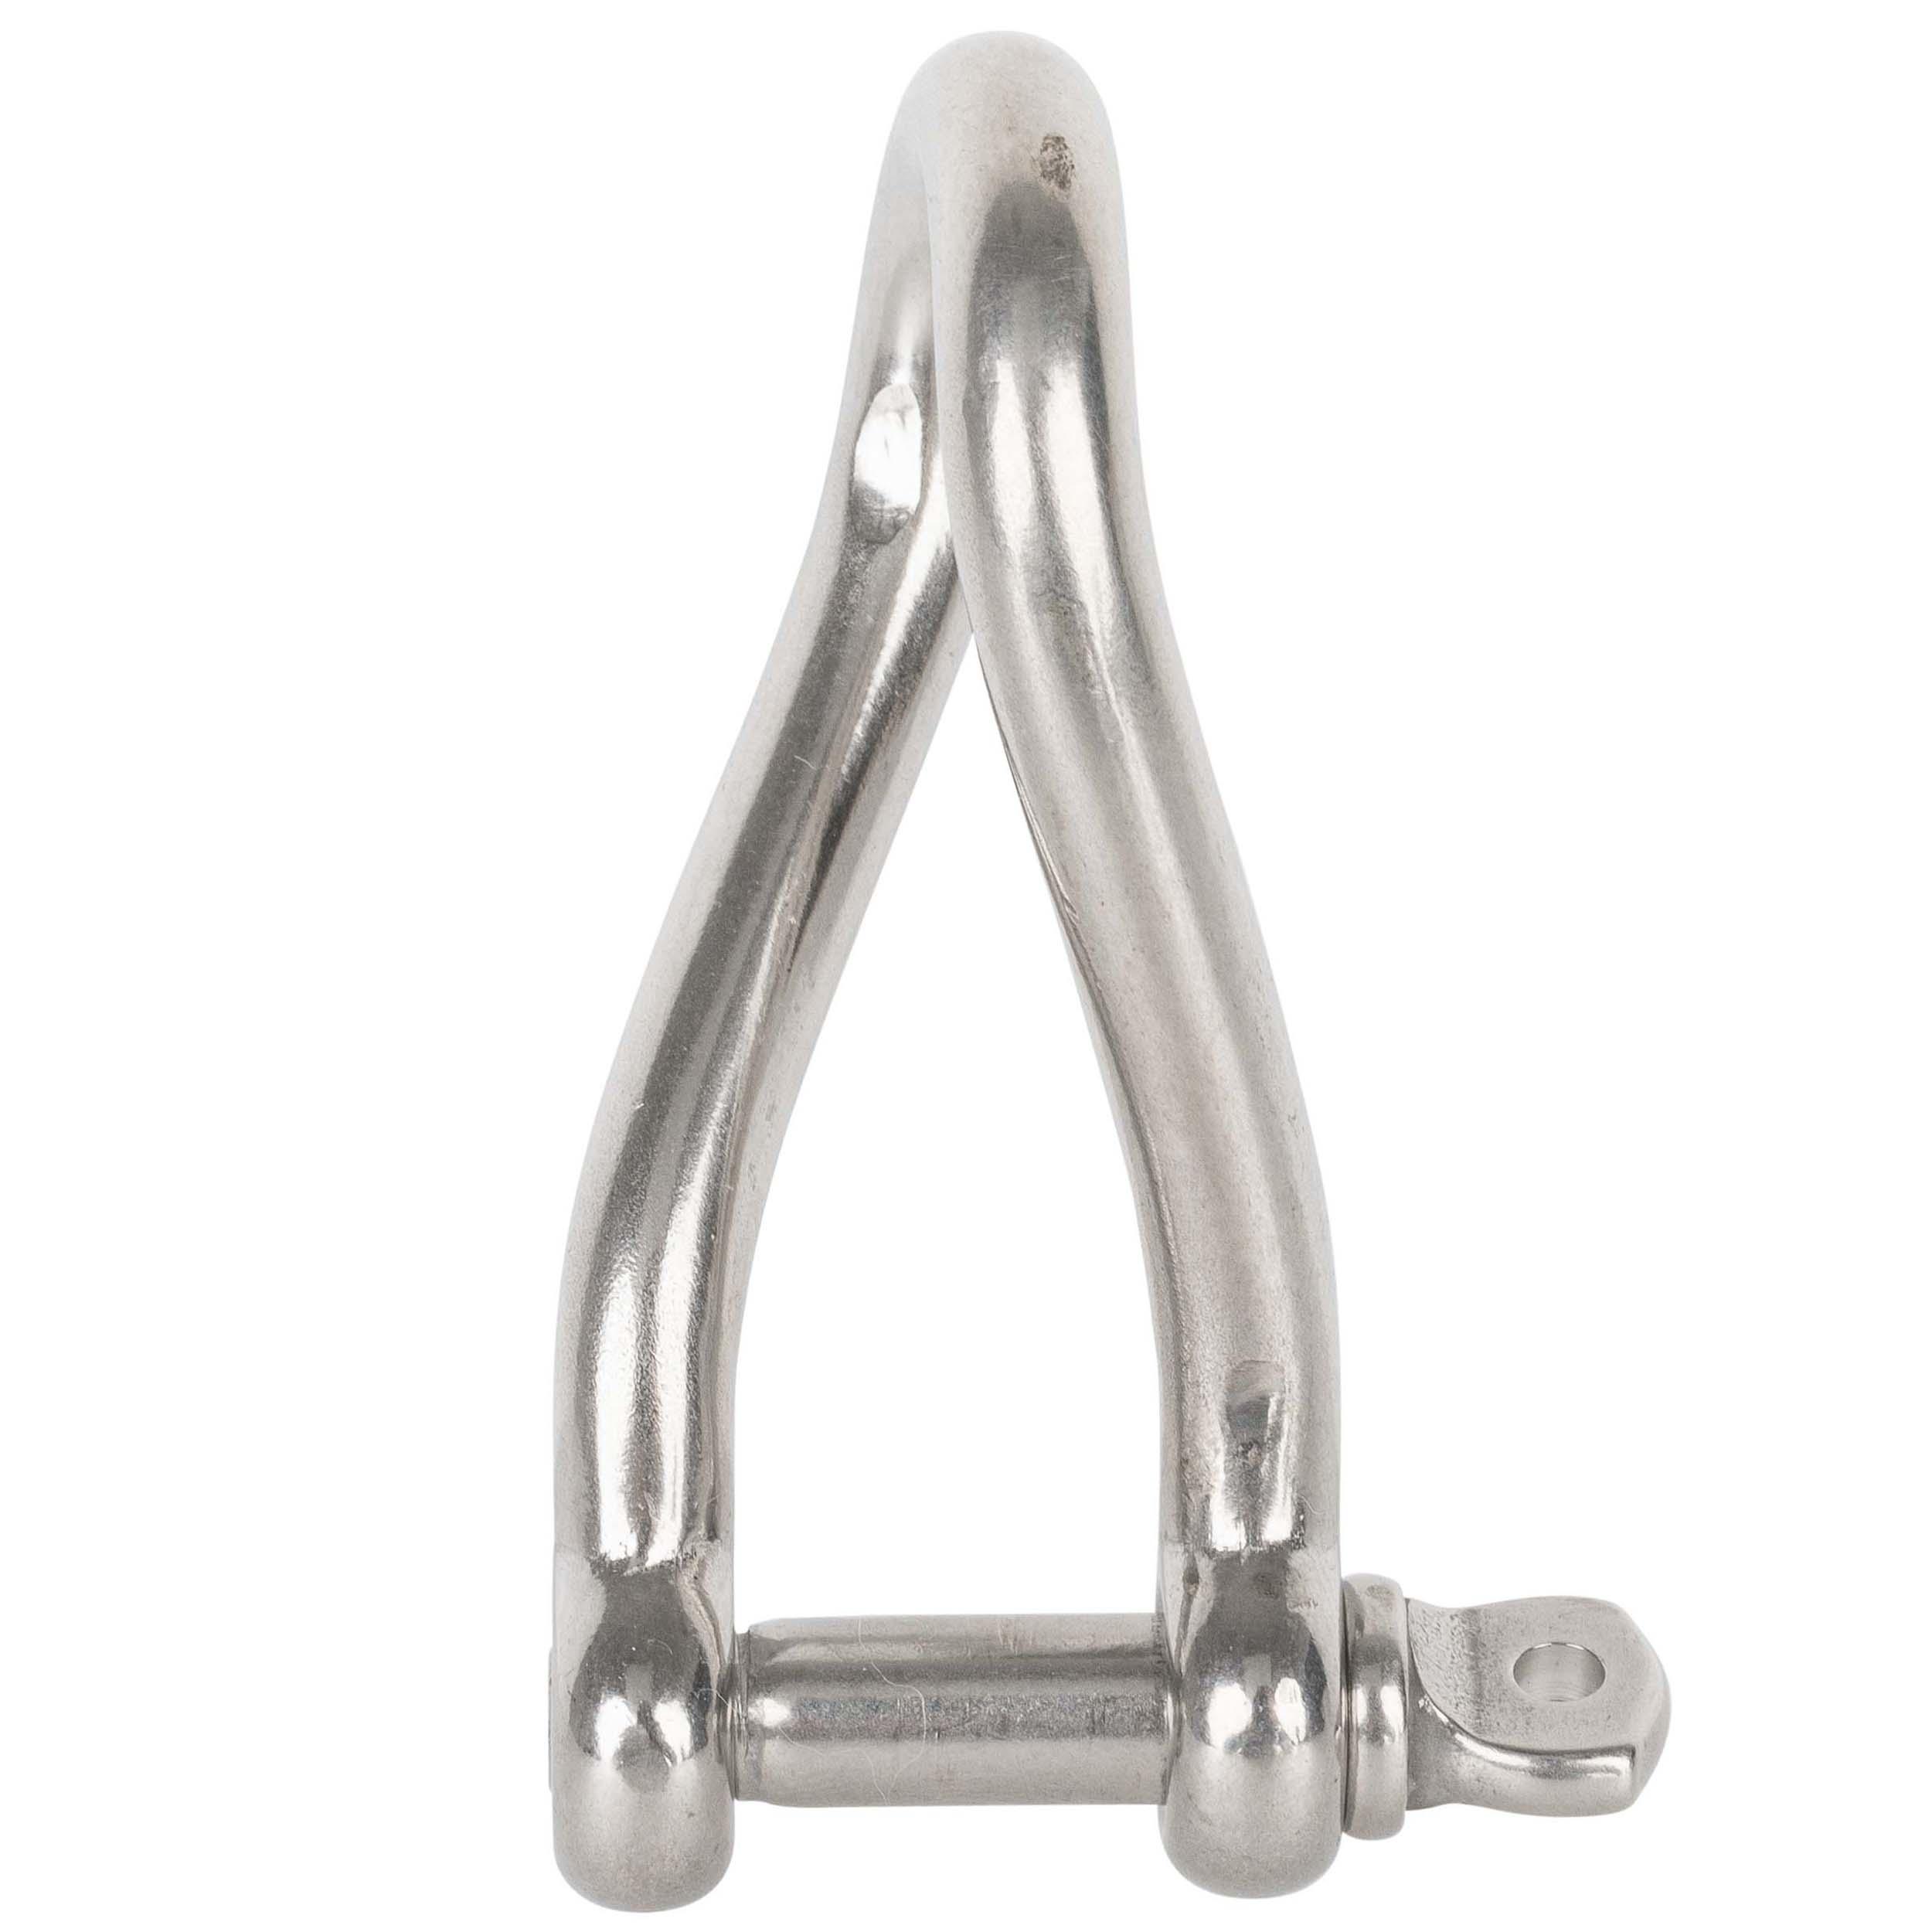 8mm forged stainless steel twisted sailing shackle 2/4